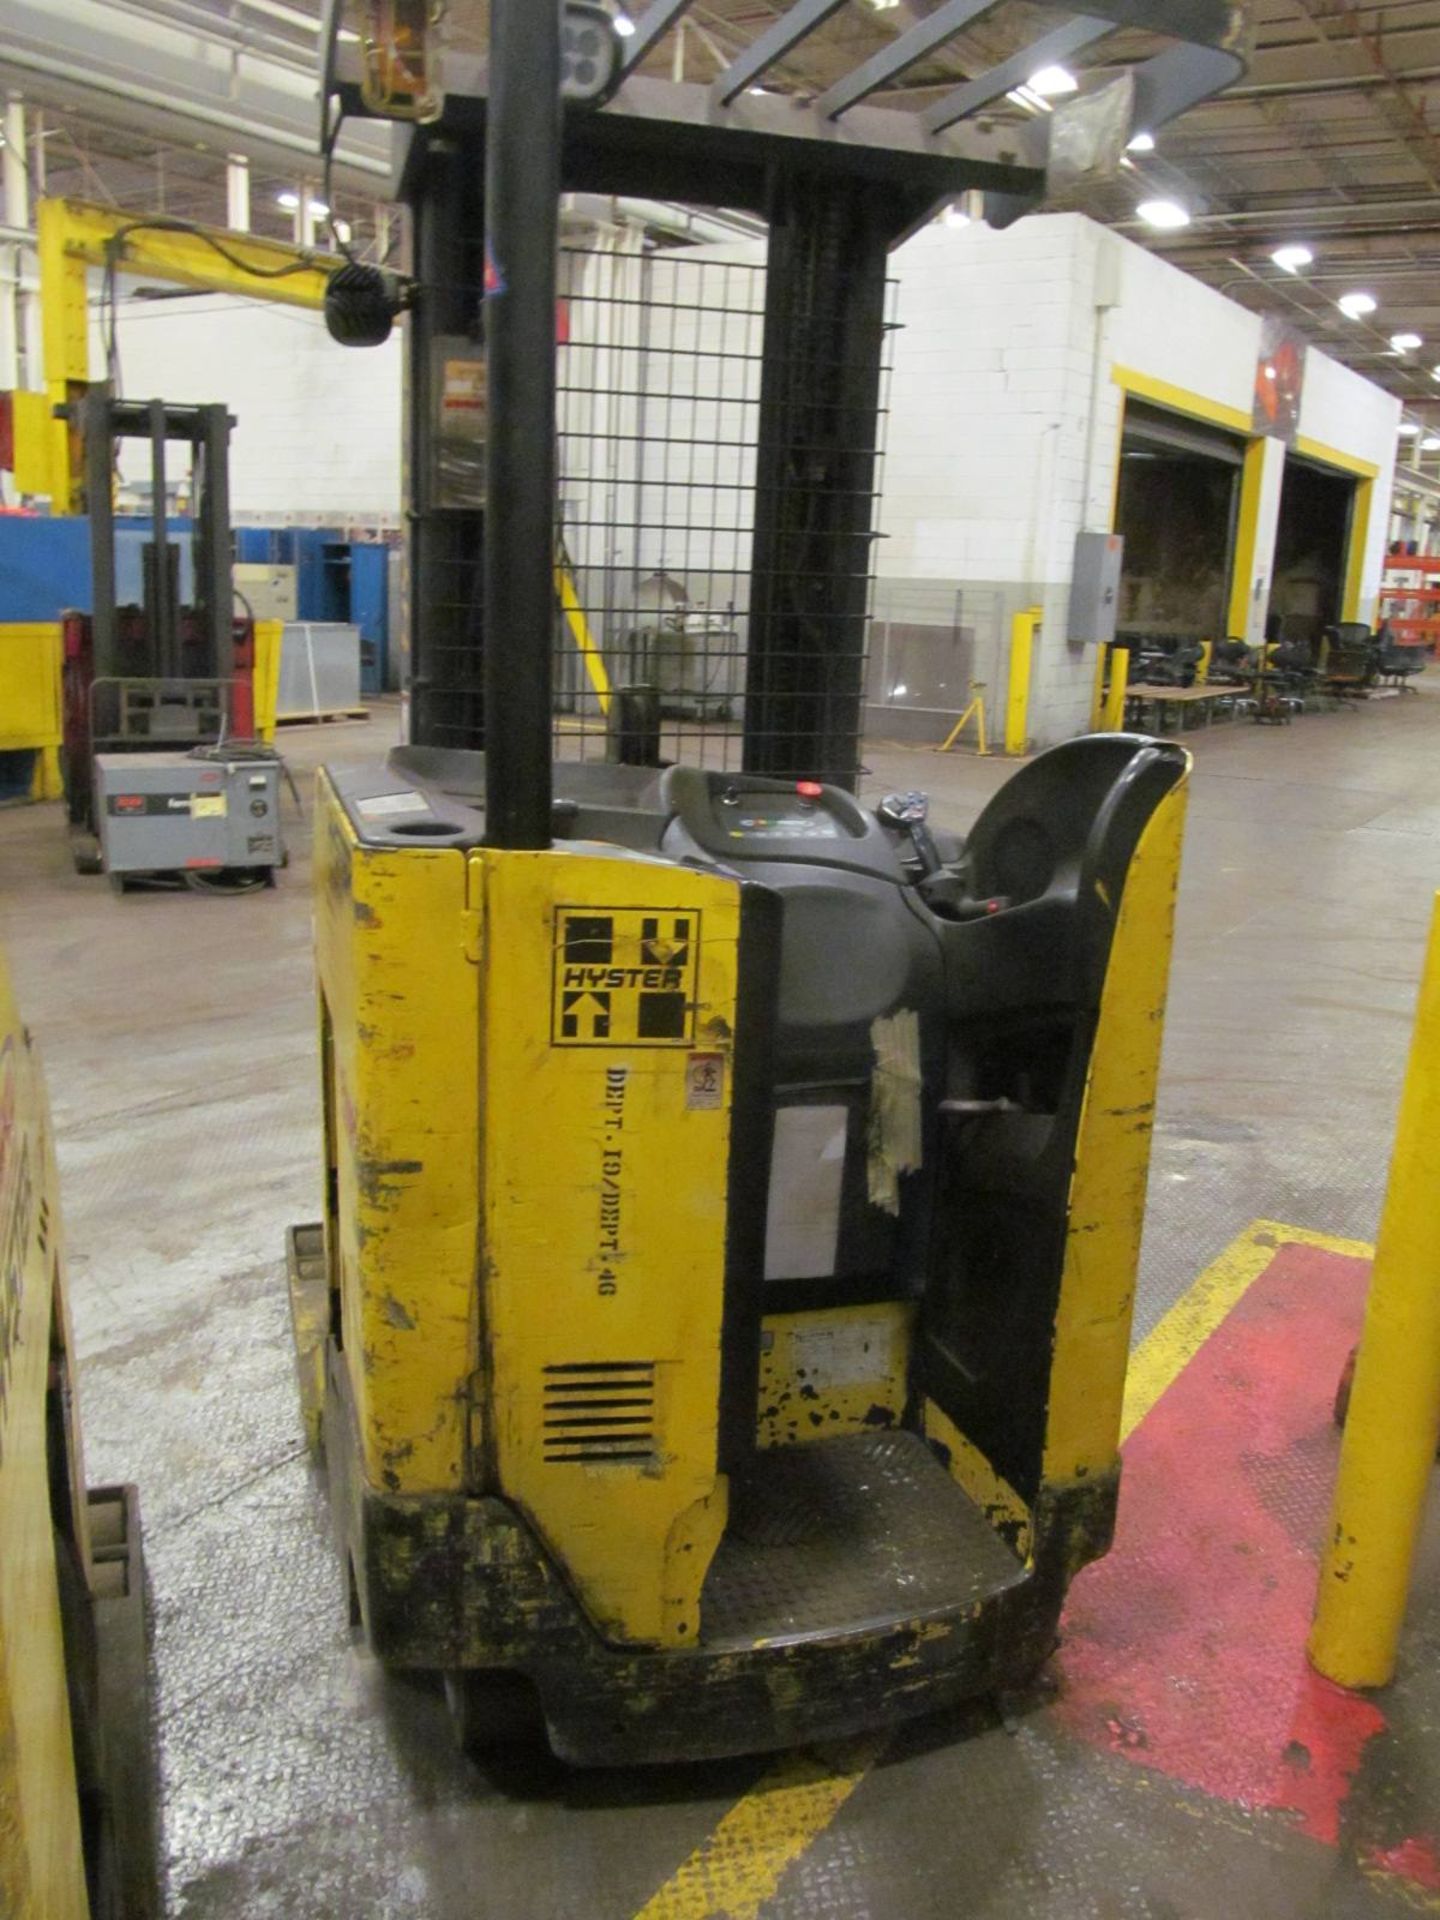 Hyster Model N40ZRS-14.5 3750 lb. Electric Reach Forklift Truck - Image 3 of 5